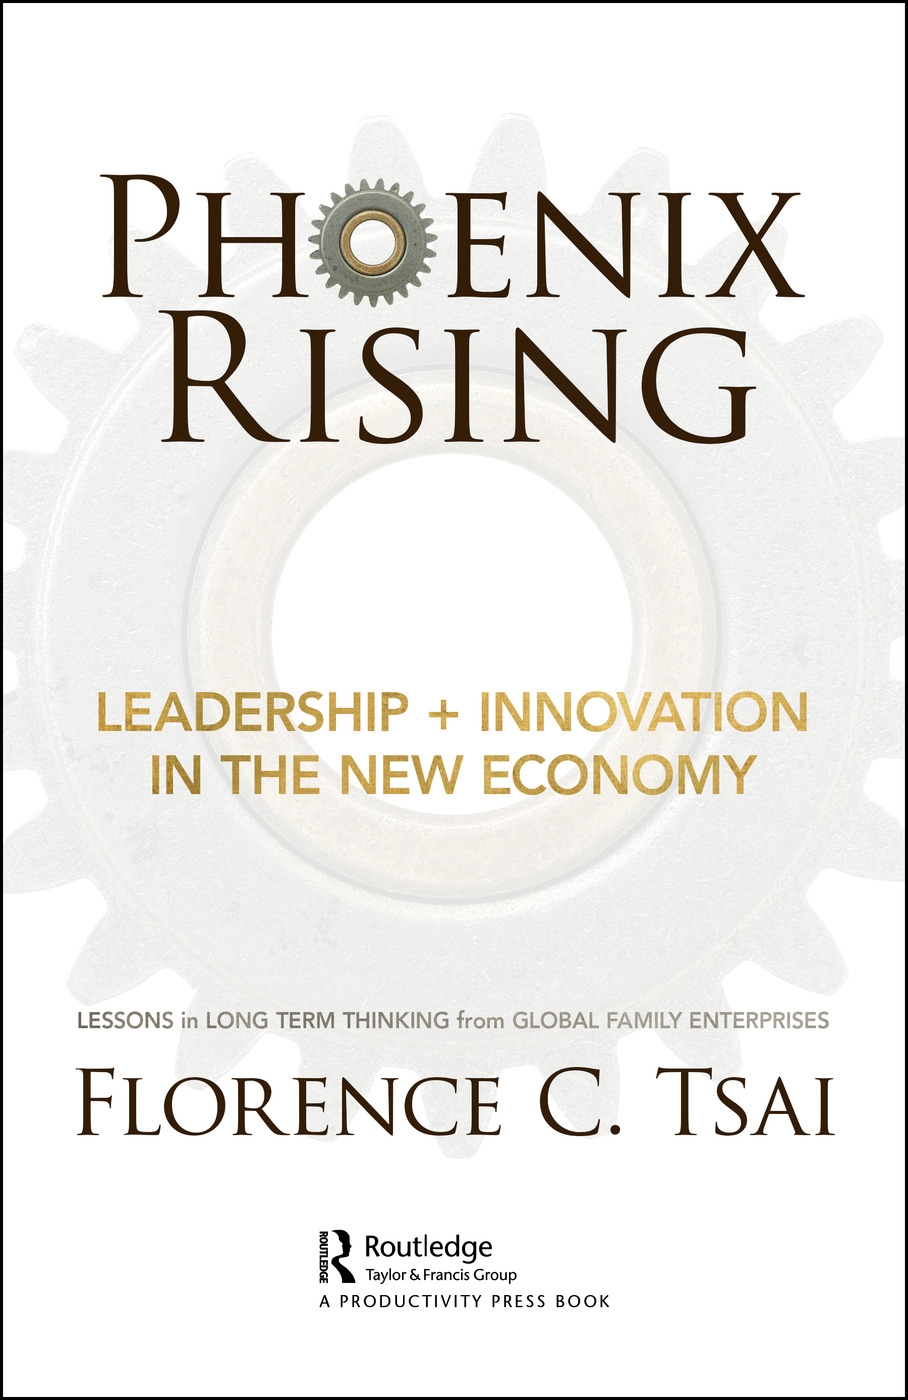 Phoenix Rising: Leadership + Innovation in the New Economy: Lessons in Long Term Thinking from Global Family Enterprises